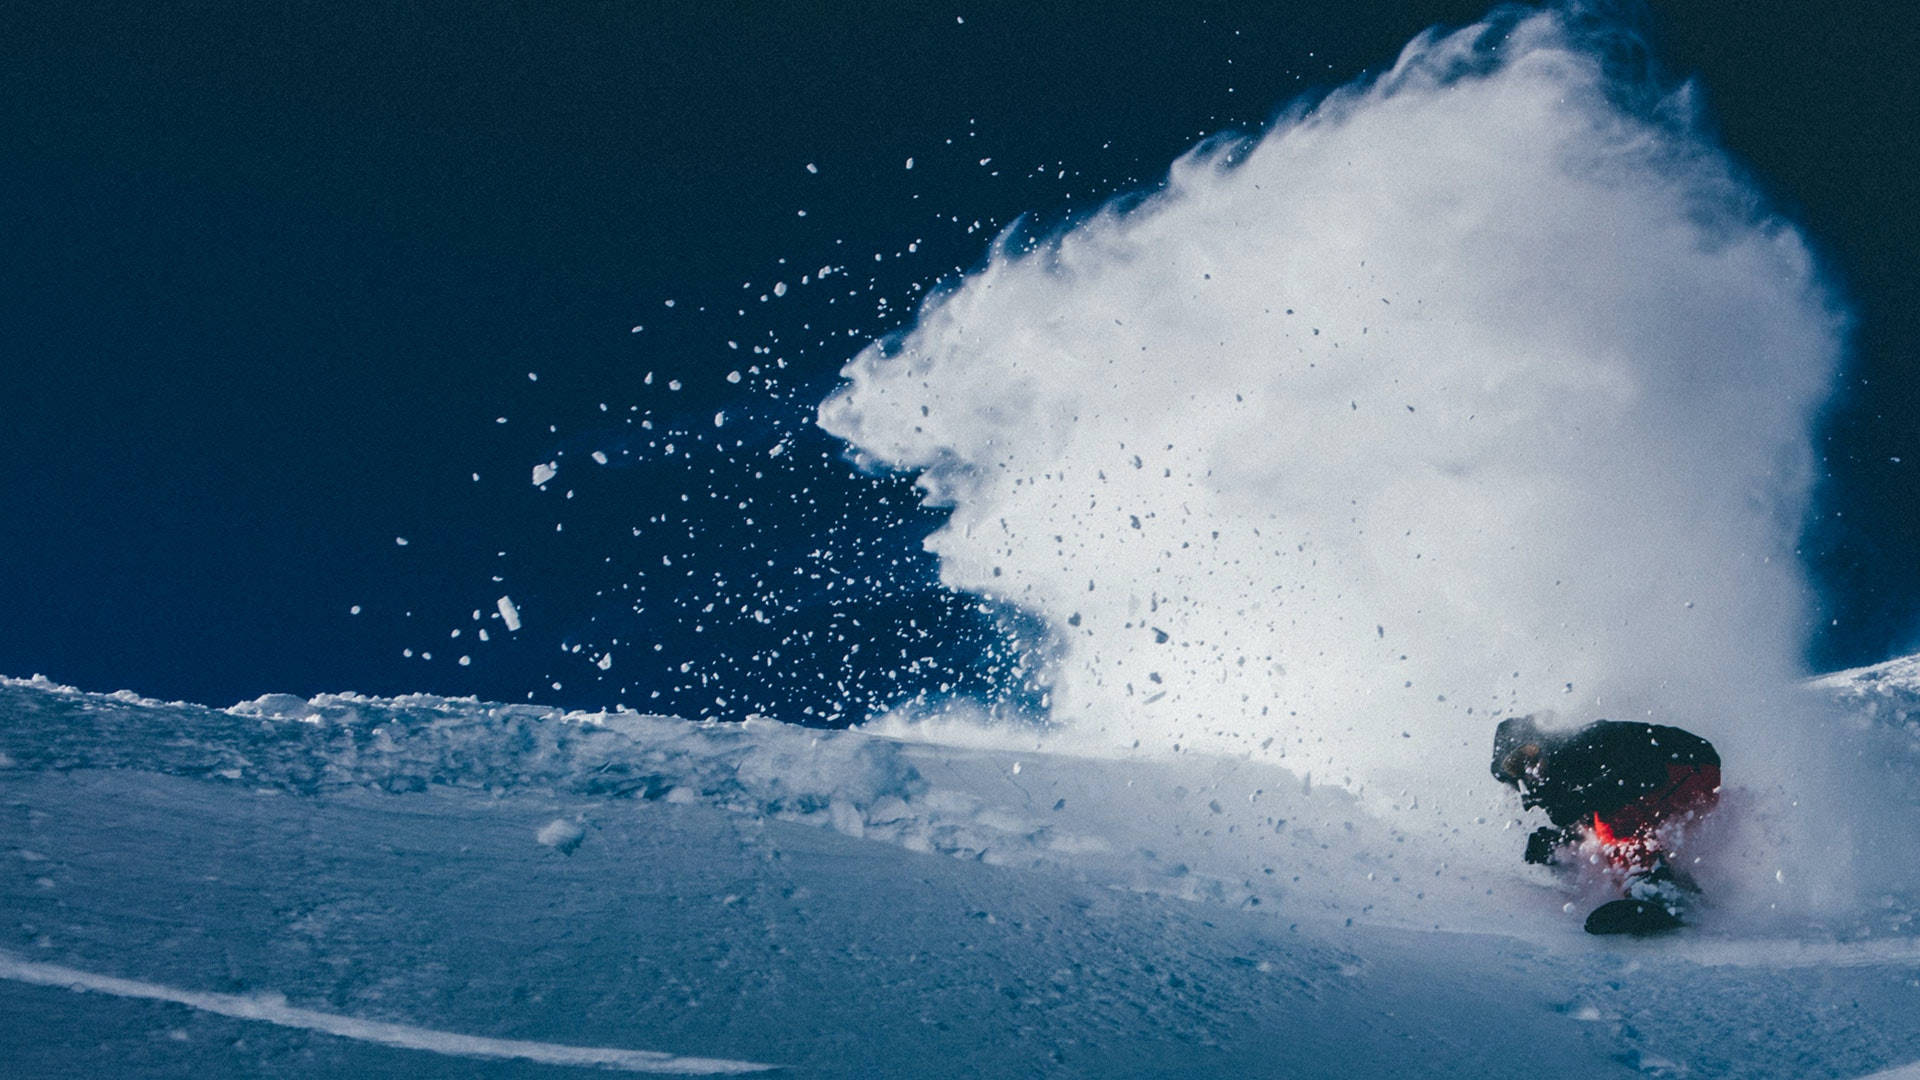 Snowboarding With Flying Snow Background